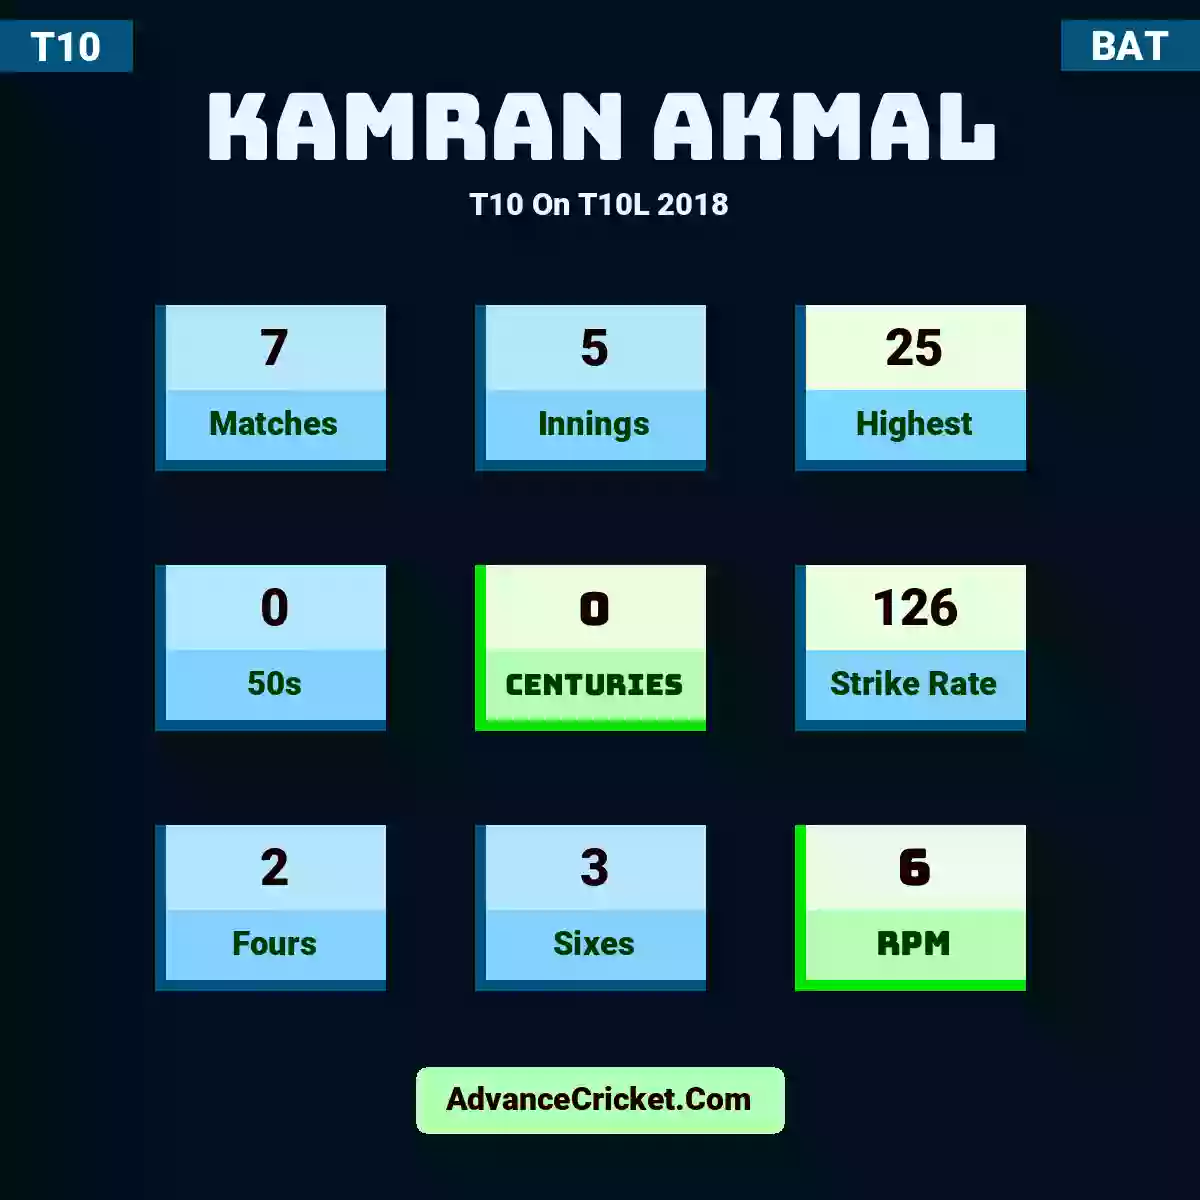 Kamran Akmal T10  On T10L 2018, Kamran Akmal played 7 matches, scored 25 runs as highest, 0 half-centuries, and 0 centuries, with a strike rate of 126. K.Akmal hit 2 fours and 3 sixes, with an RPM of 6.